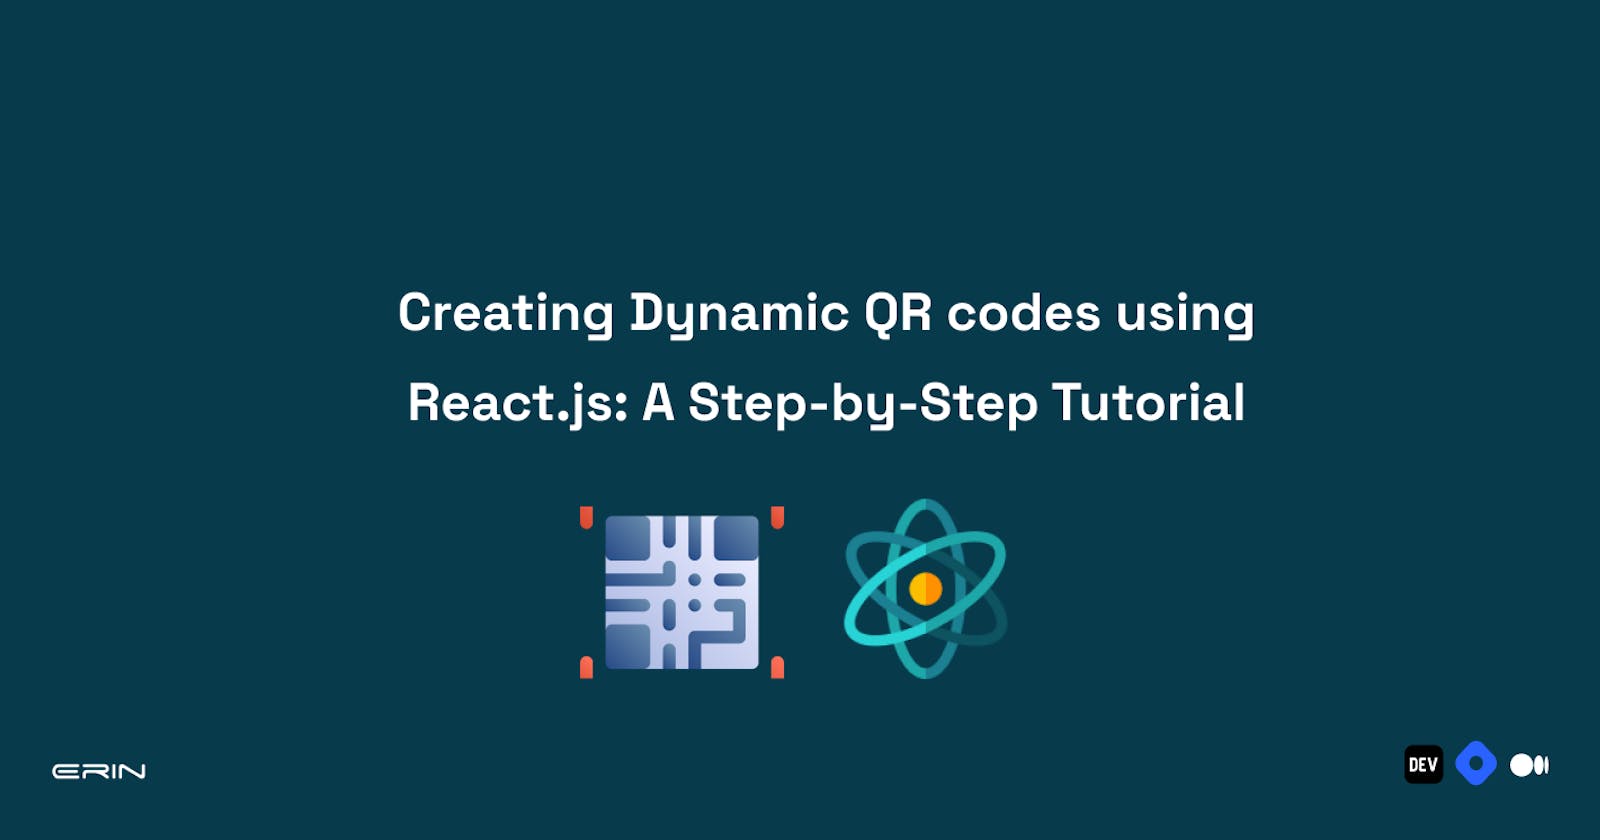 Creating Dynamic QR Codes Using React.js: A Step-by-Step Tutorial